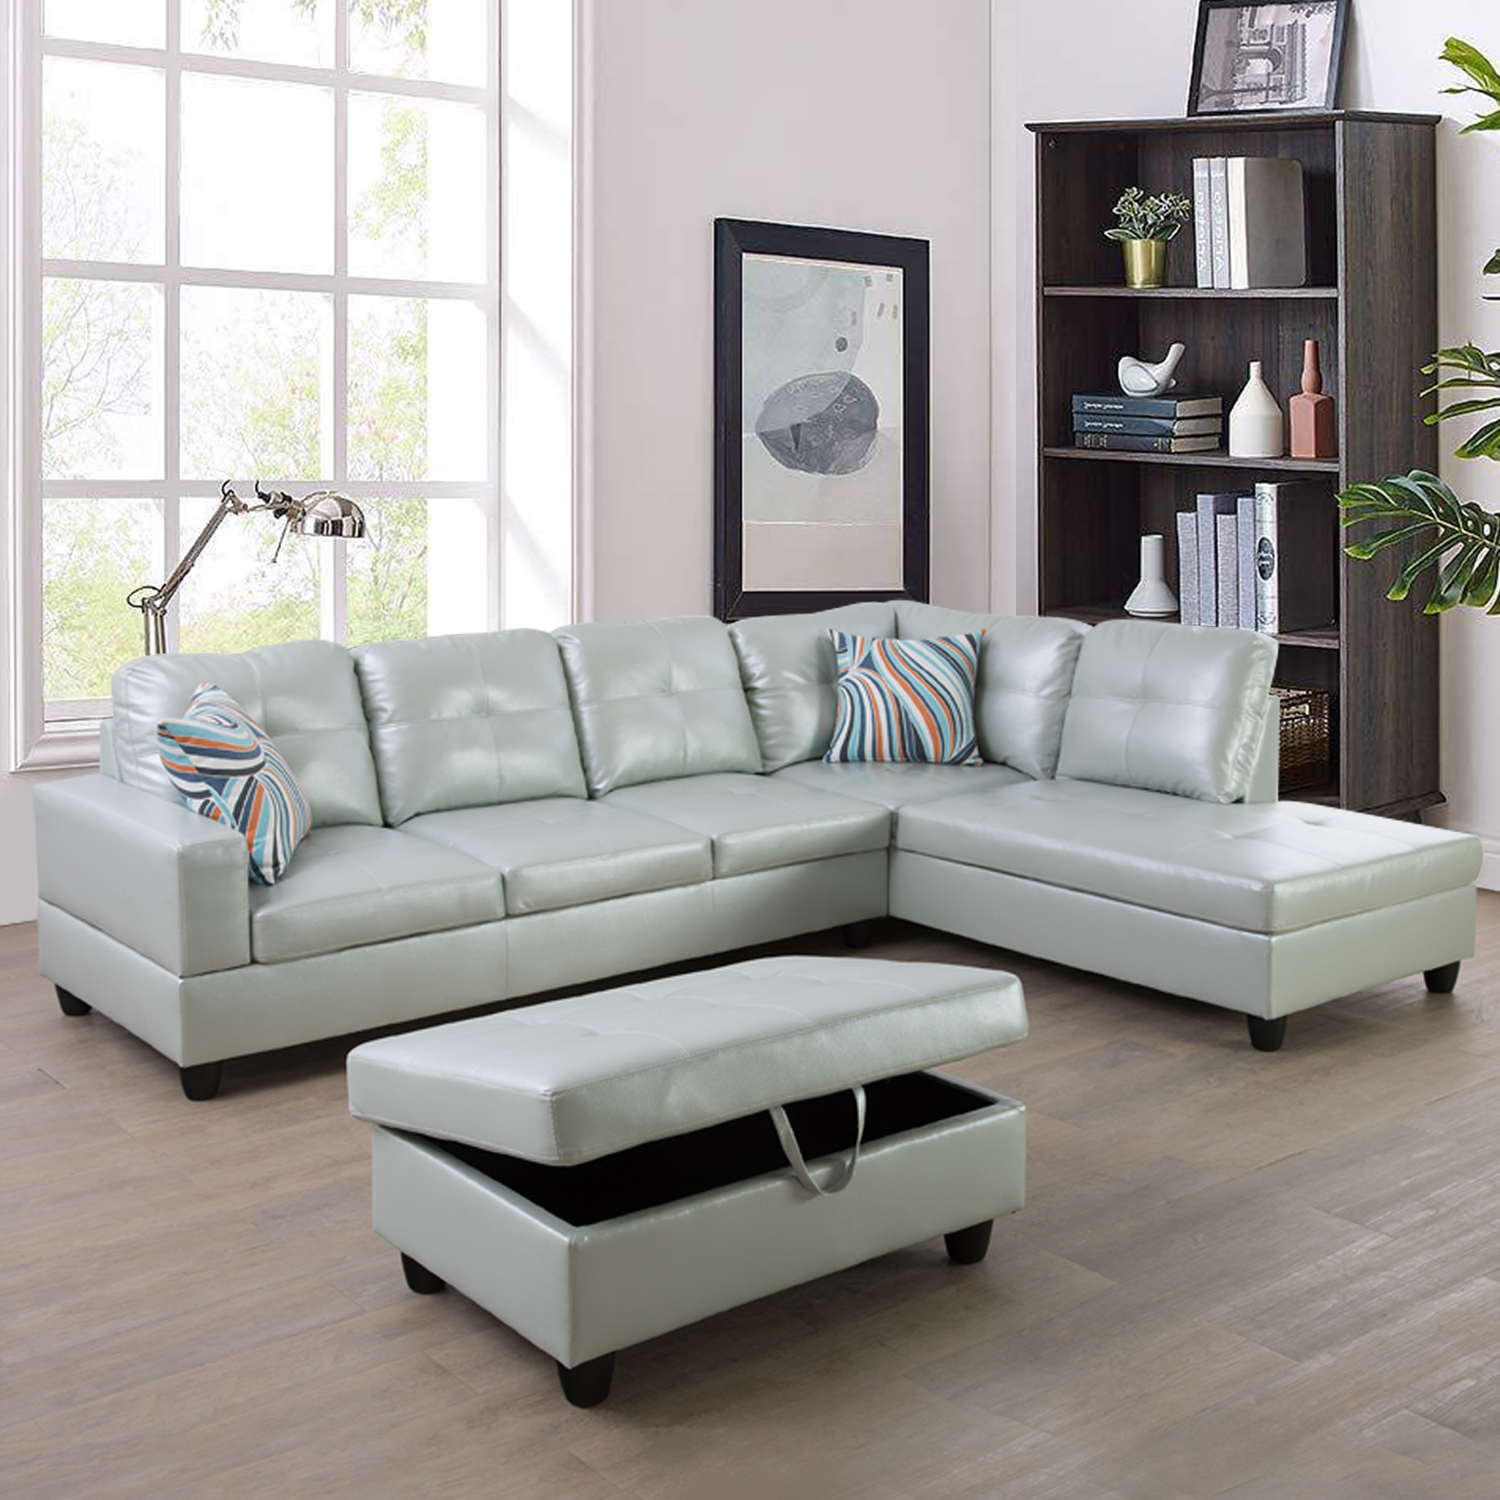 Ainehome Silver Green L-Shaped Leather Combo Sofa Set